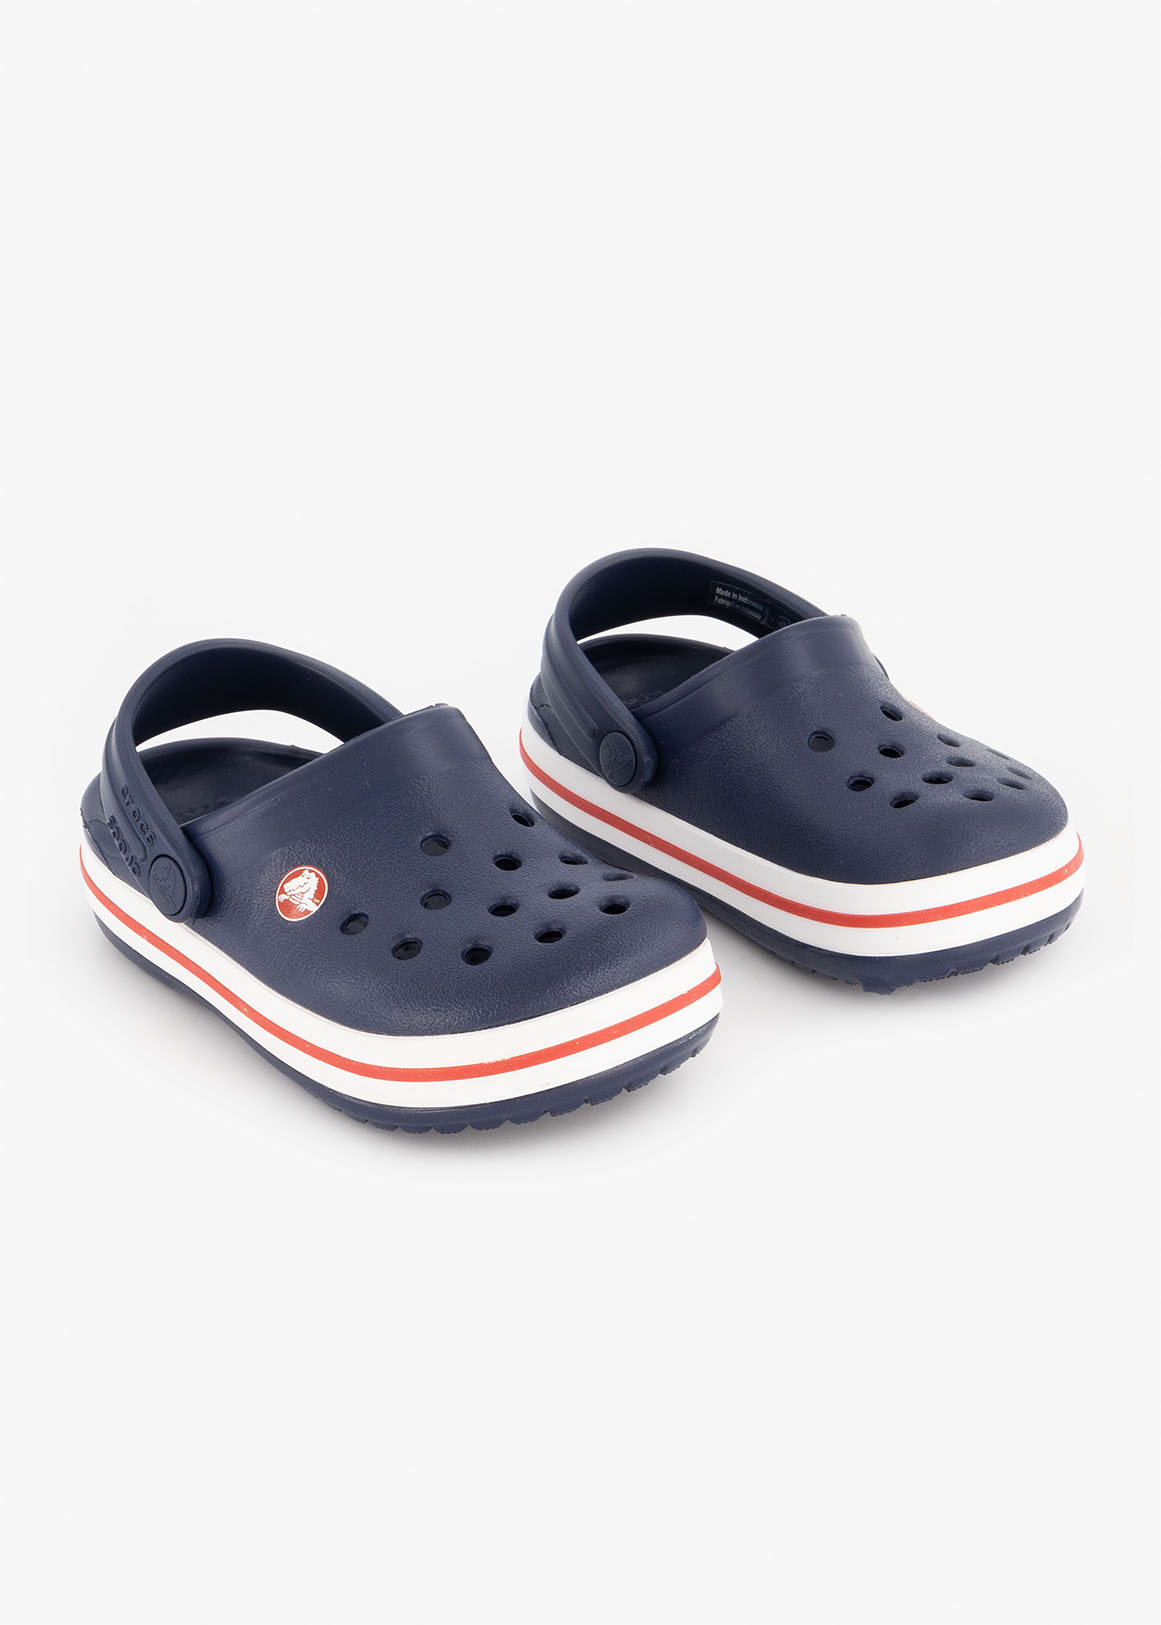 Crocband Clogs (Size 4-13) Younger Child | Woolworths.co.za